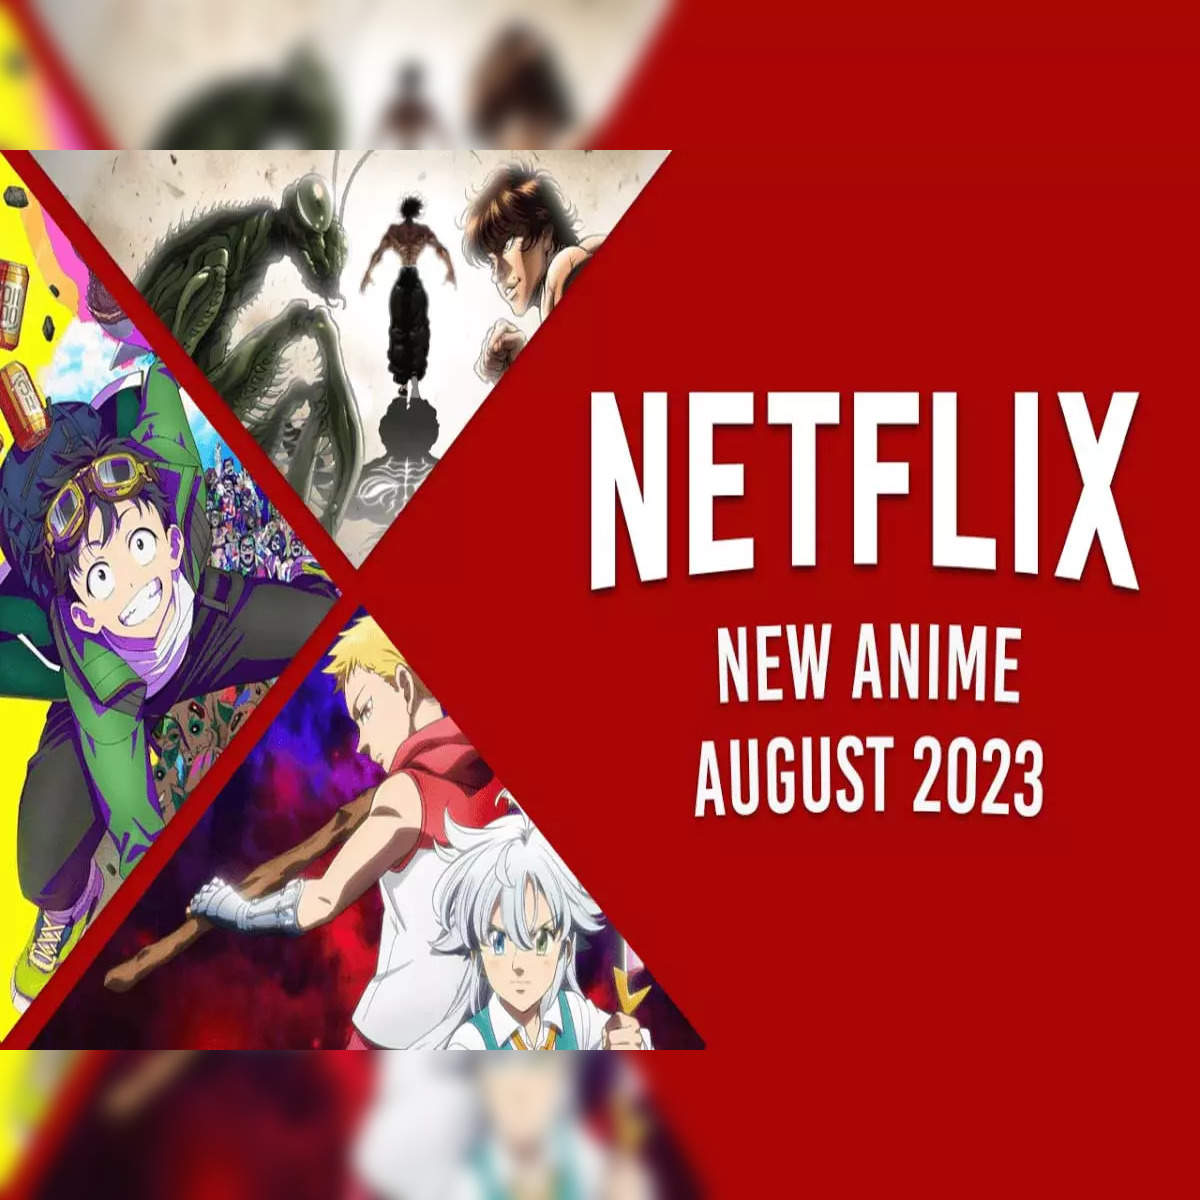 Best anime series and films on Netflix 2023